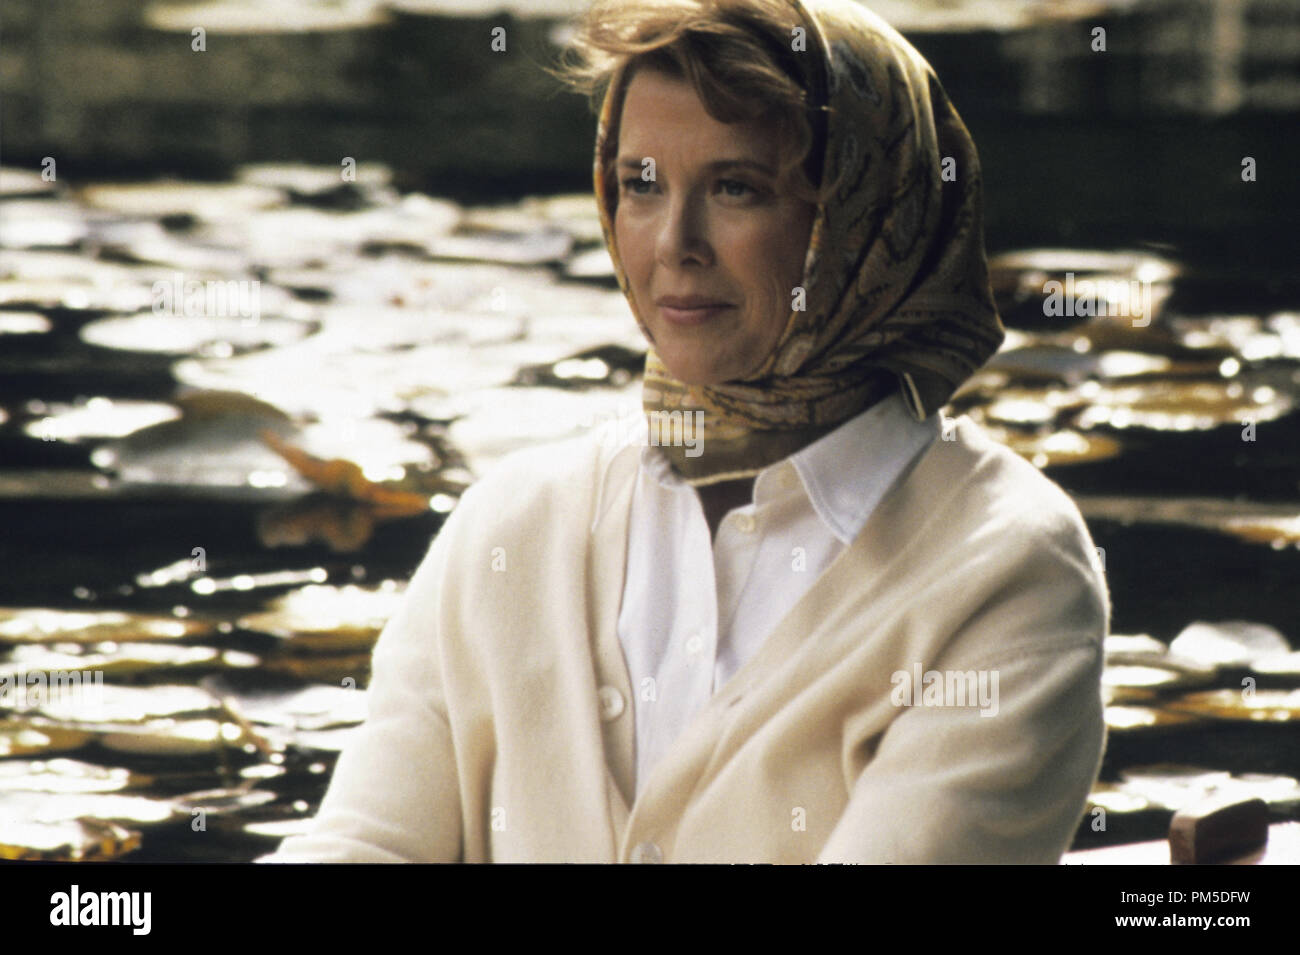 Film Still / Publicity Still from 'Mrs. Harris' Annette Bening 2005 Photo Credit: Lorey Sebastian   File Reference # 30736392THA  For Editorial Use Only -  All Rights Reserved Stock Photo